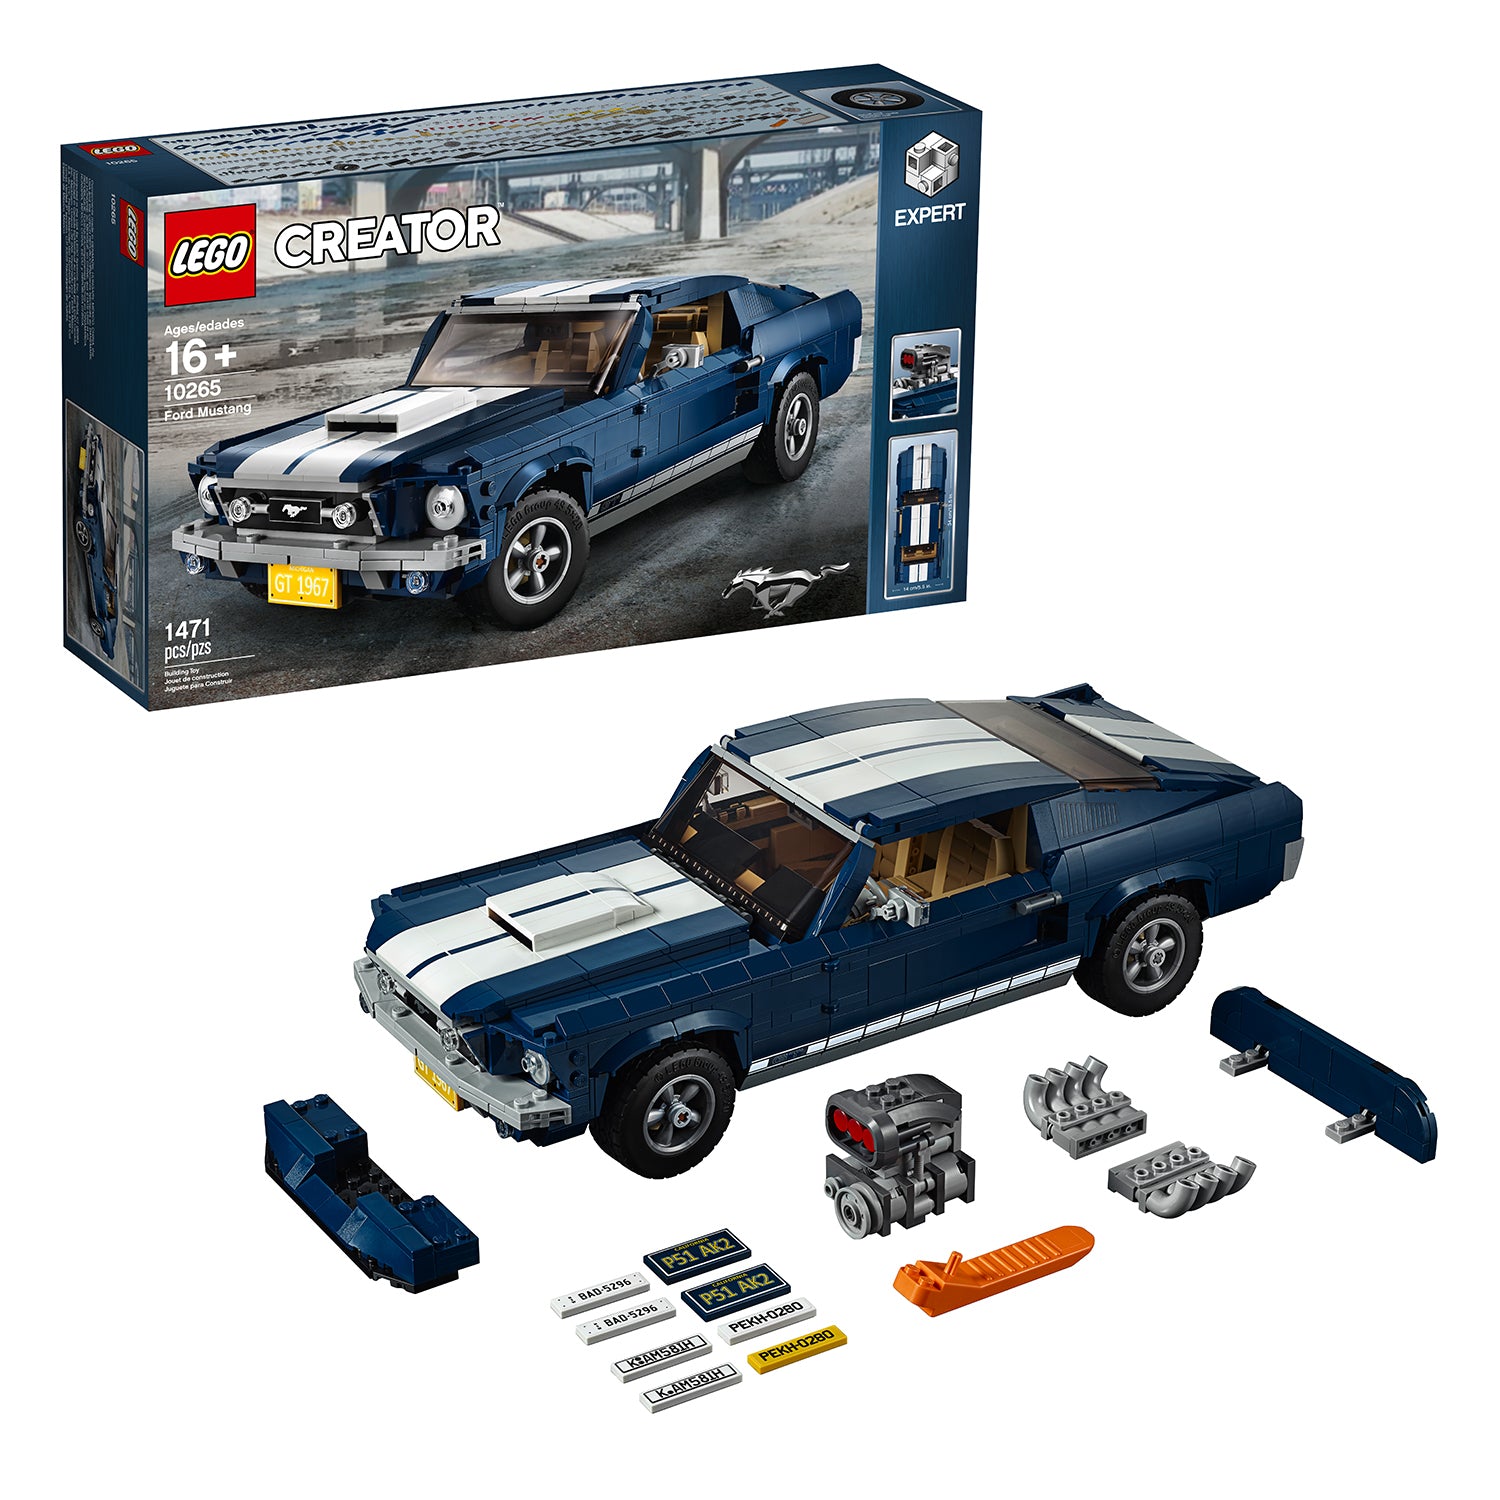 LEGO 10265 Creator Expert Ford Mustang, Exclusive Advanced Collector's Car Model